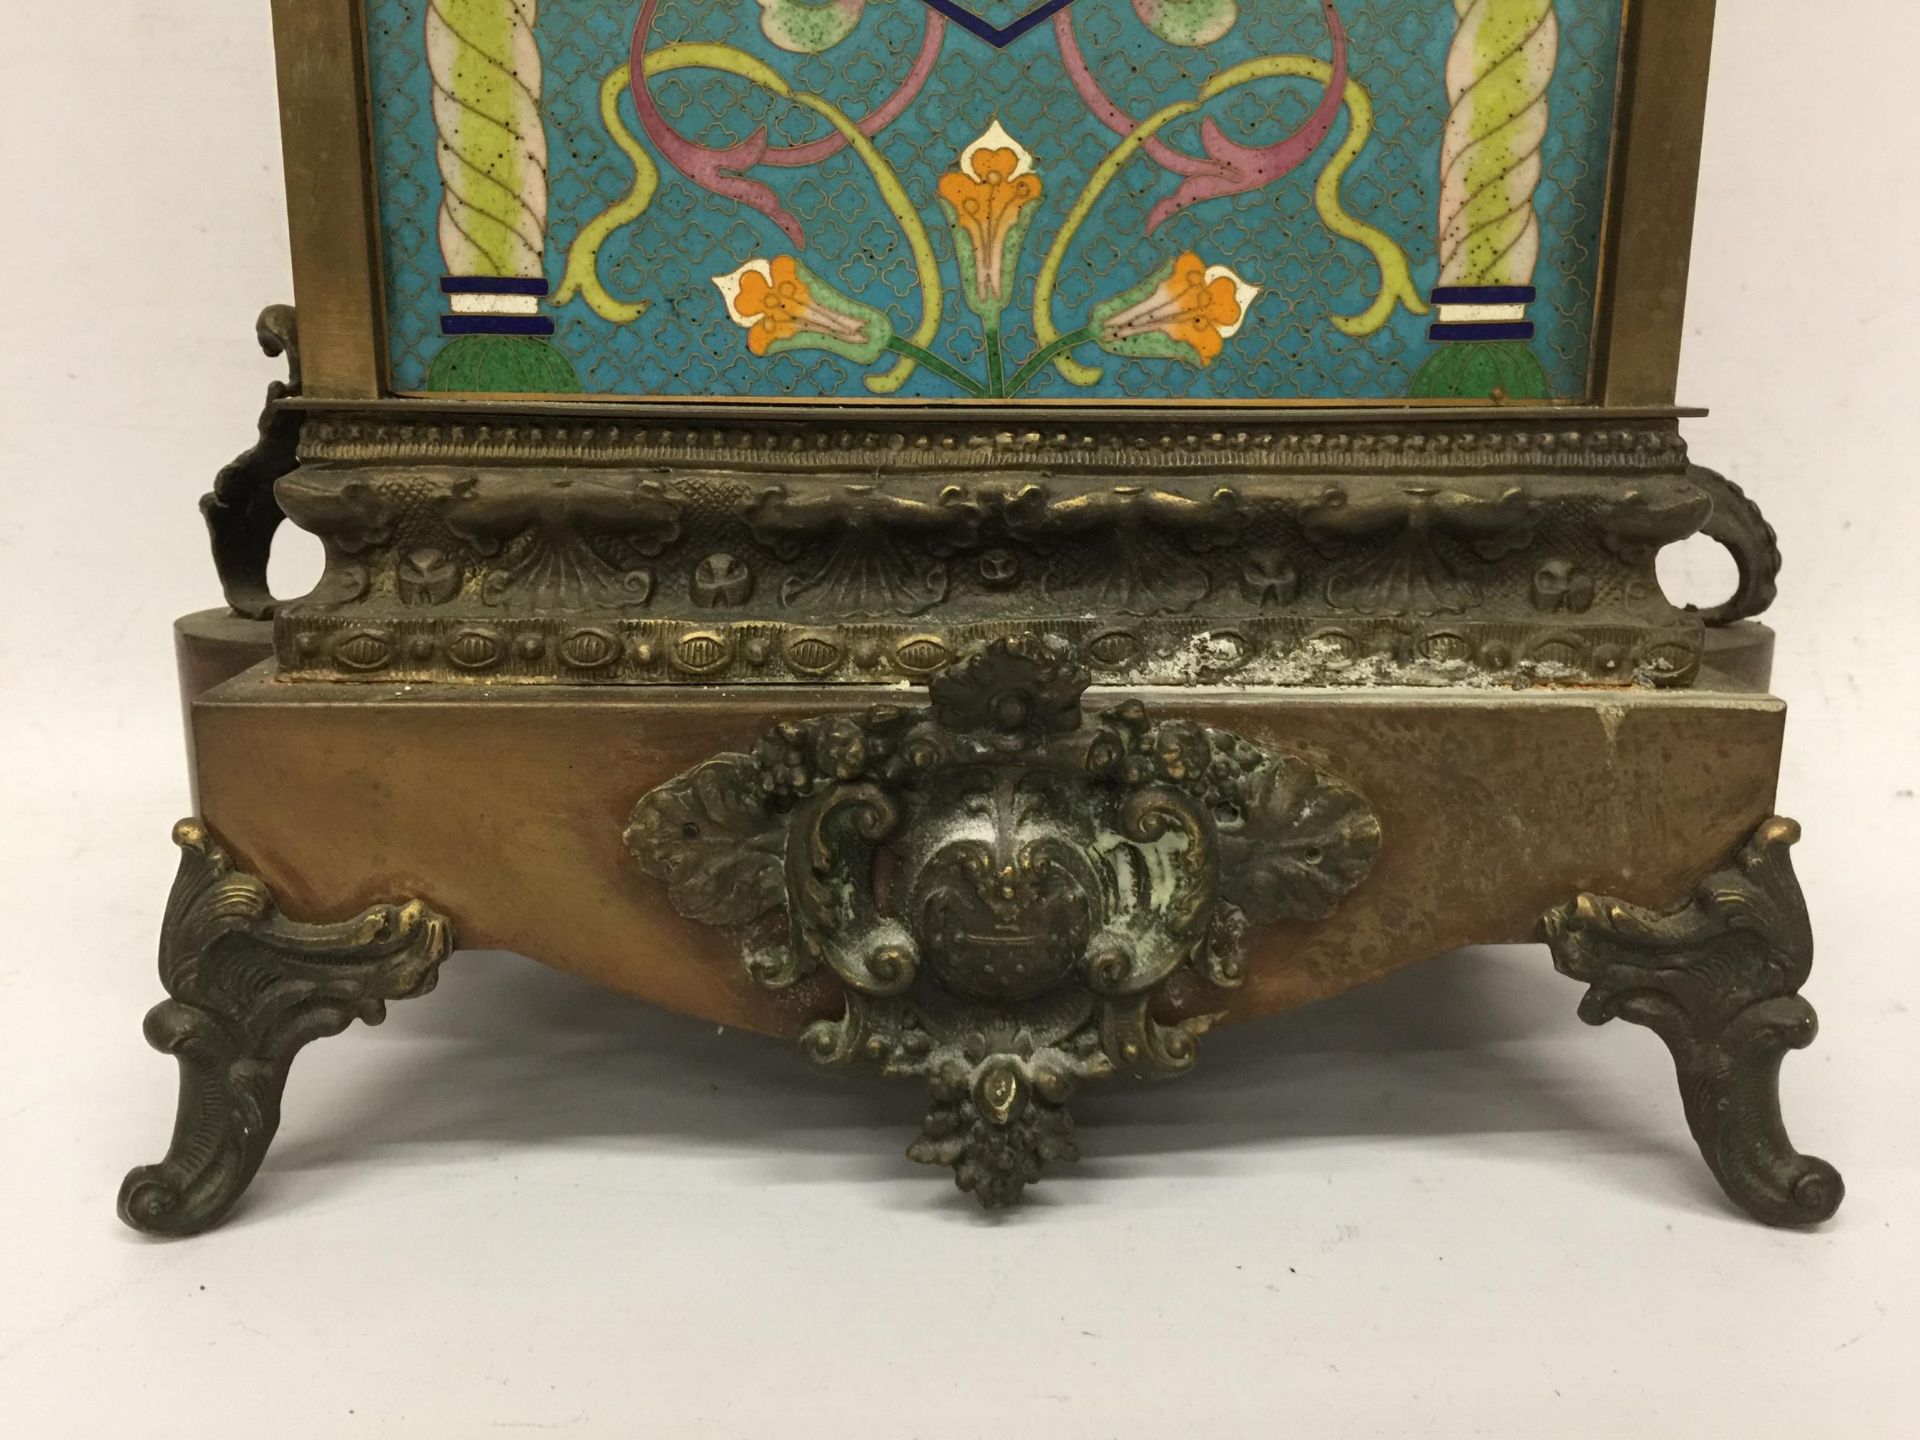 AN ART NOUVEAU CLOISONNE AND BRASS CHIMING MANTLE CLOCK WITH RAM HEAD SIDE DESIGN - Image 2 of 8